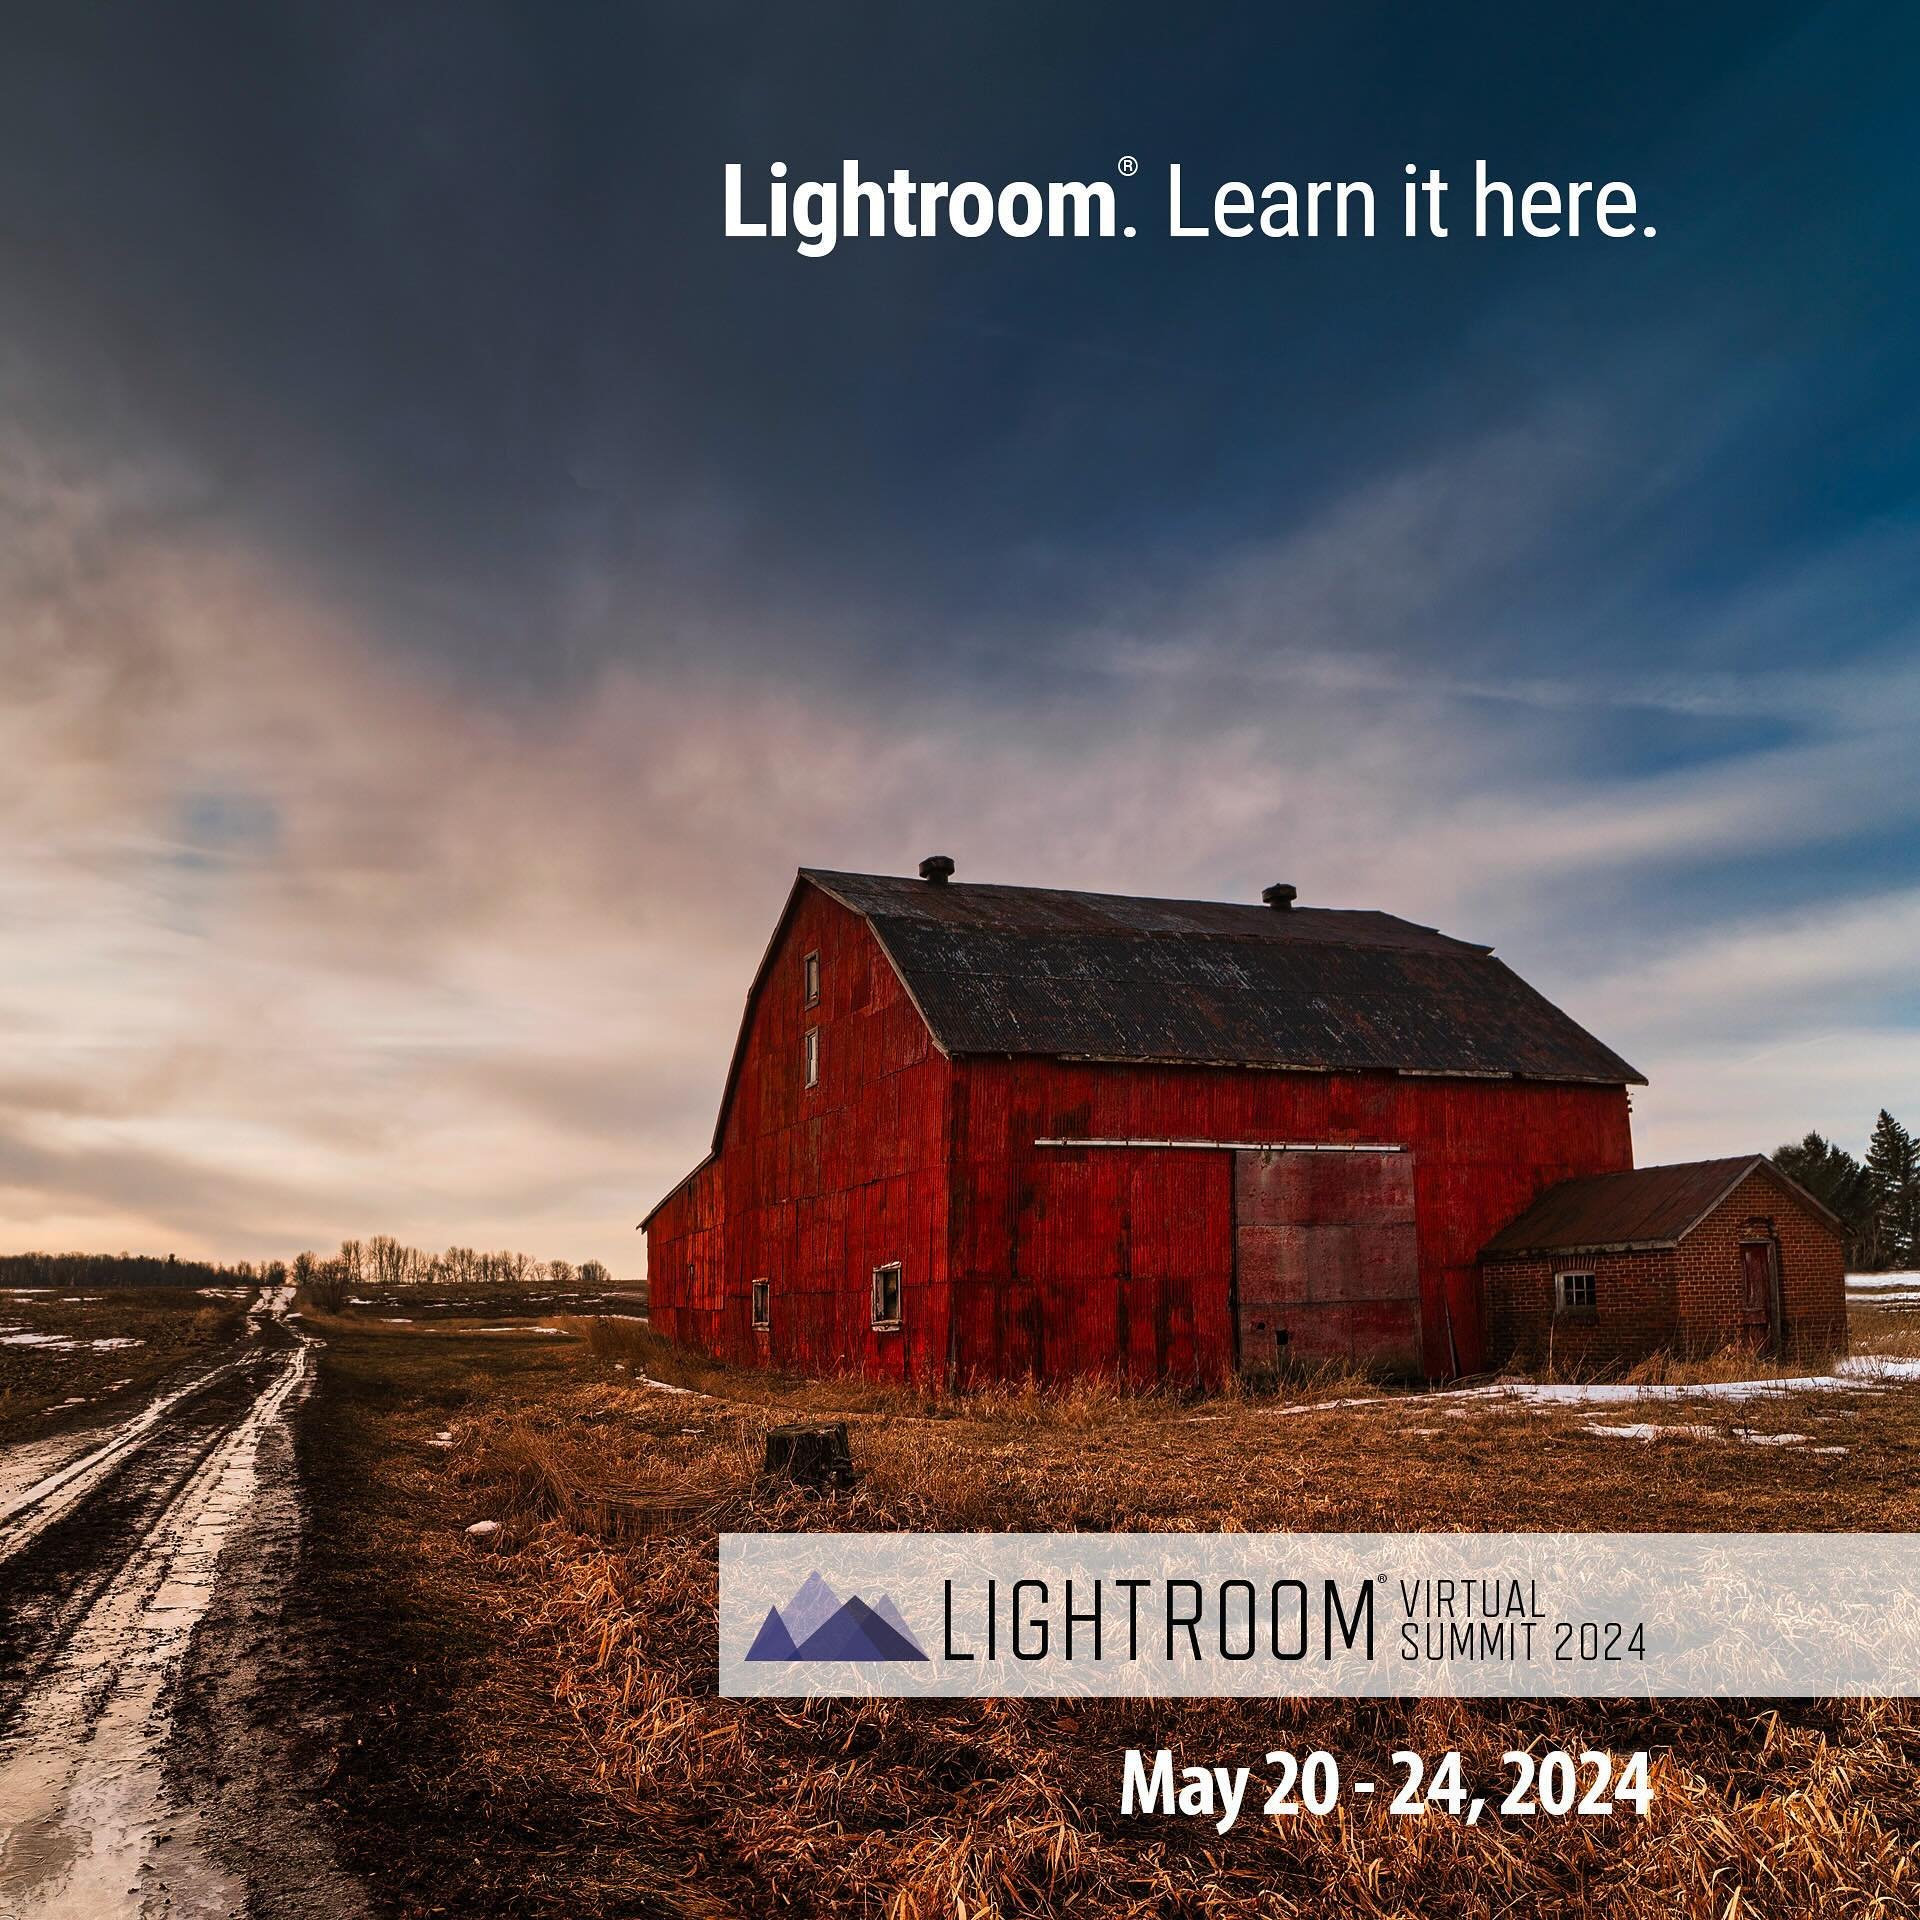 THIS starts TOMORROW so GRAB A FREE PASS ... https://bit.ly/lvs-2024 *** LINK IN BIO ***

If you use it then great ... you get to watch ALL of the 45 classes ; if you don&rsquo;t use it ... it was FREE so ... 🤷&zwj;♂️😃 

#lightroom @lightroom